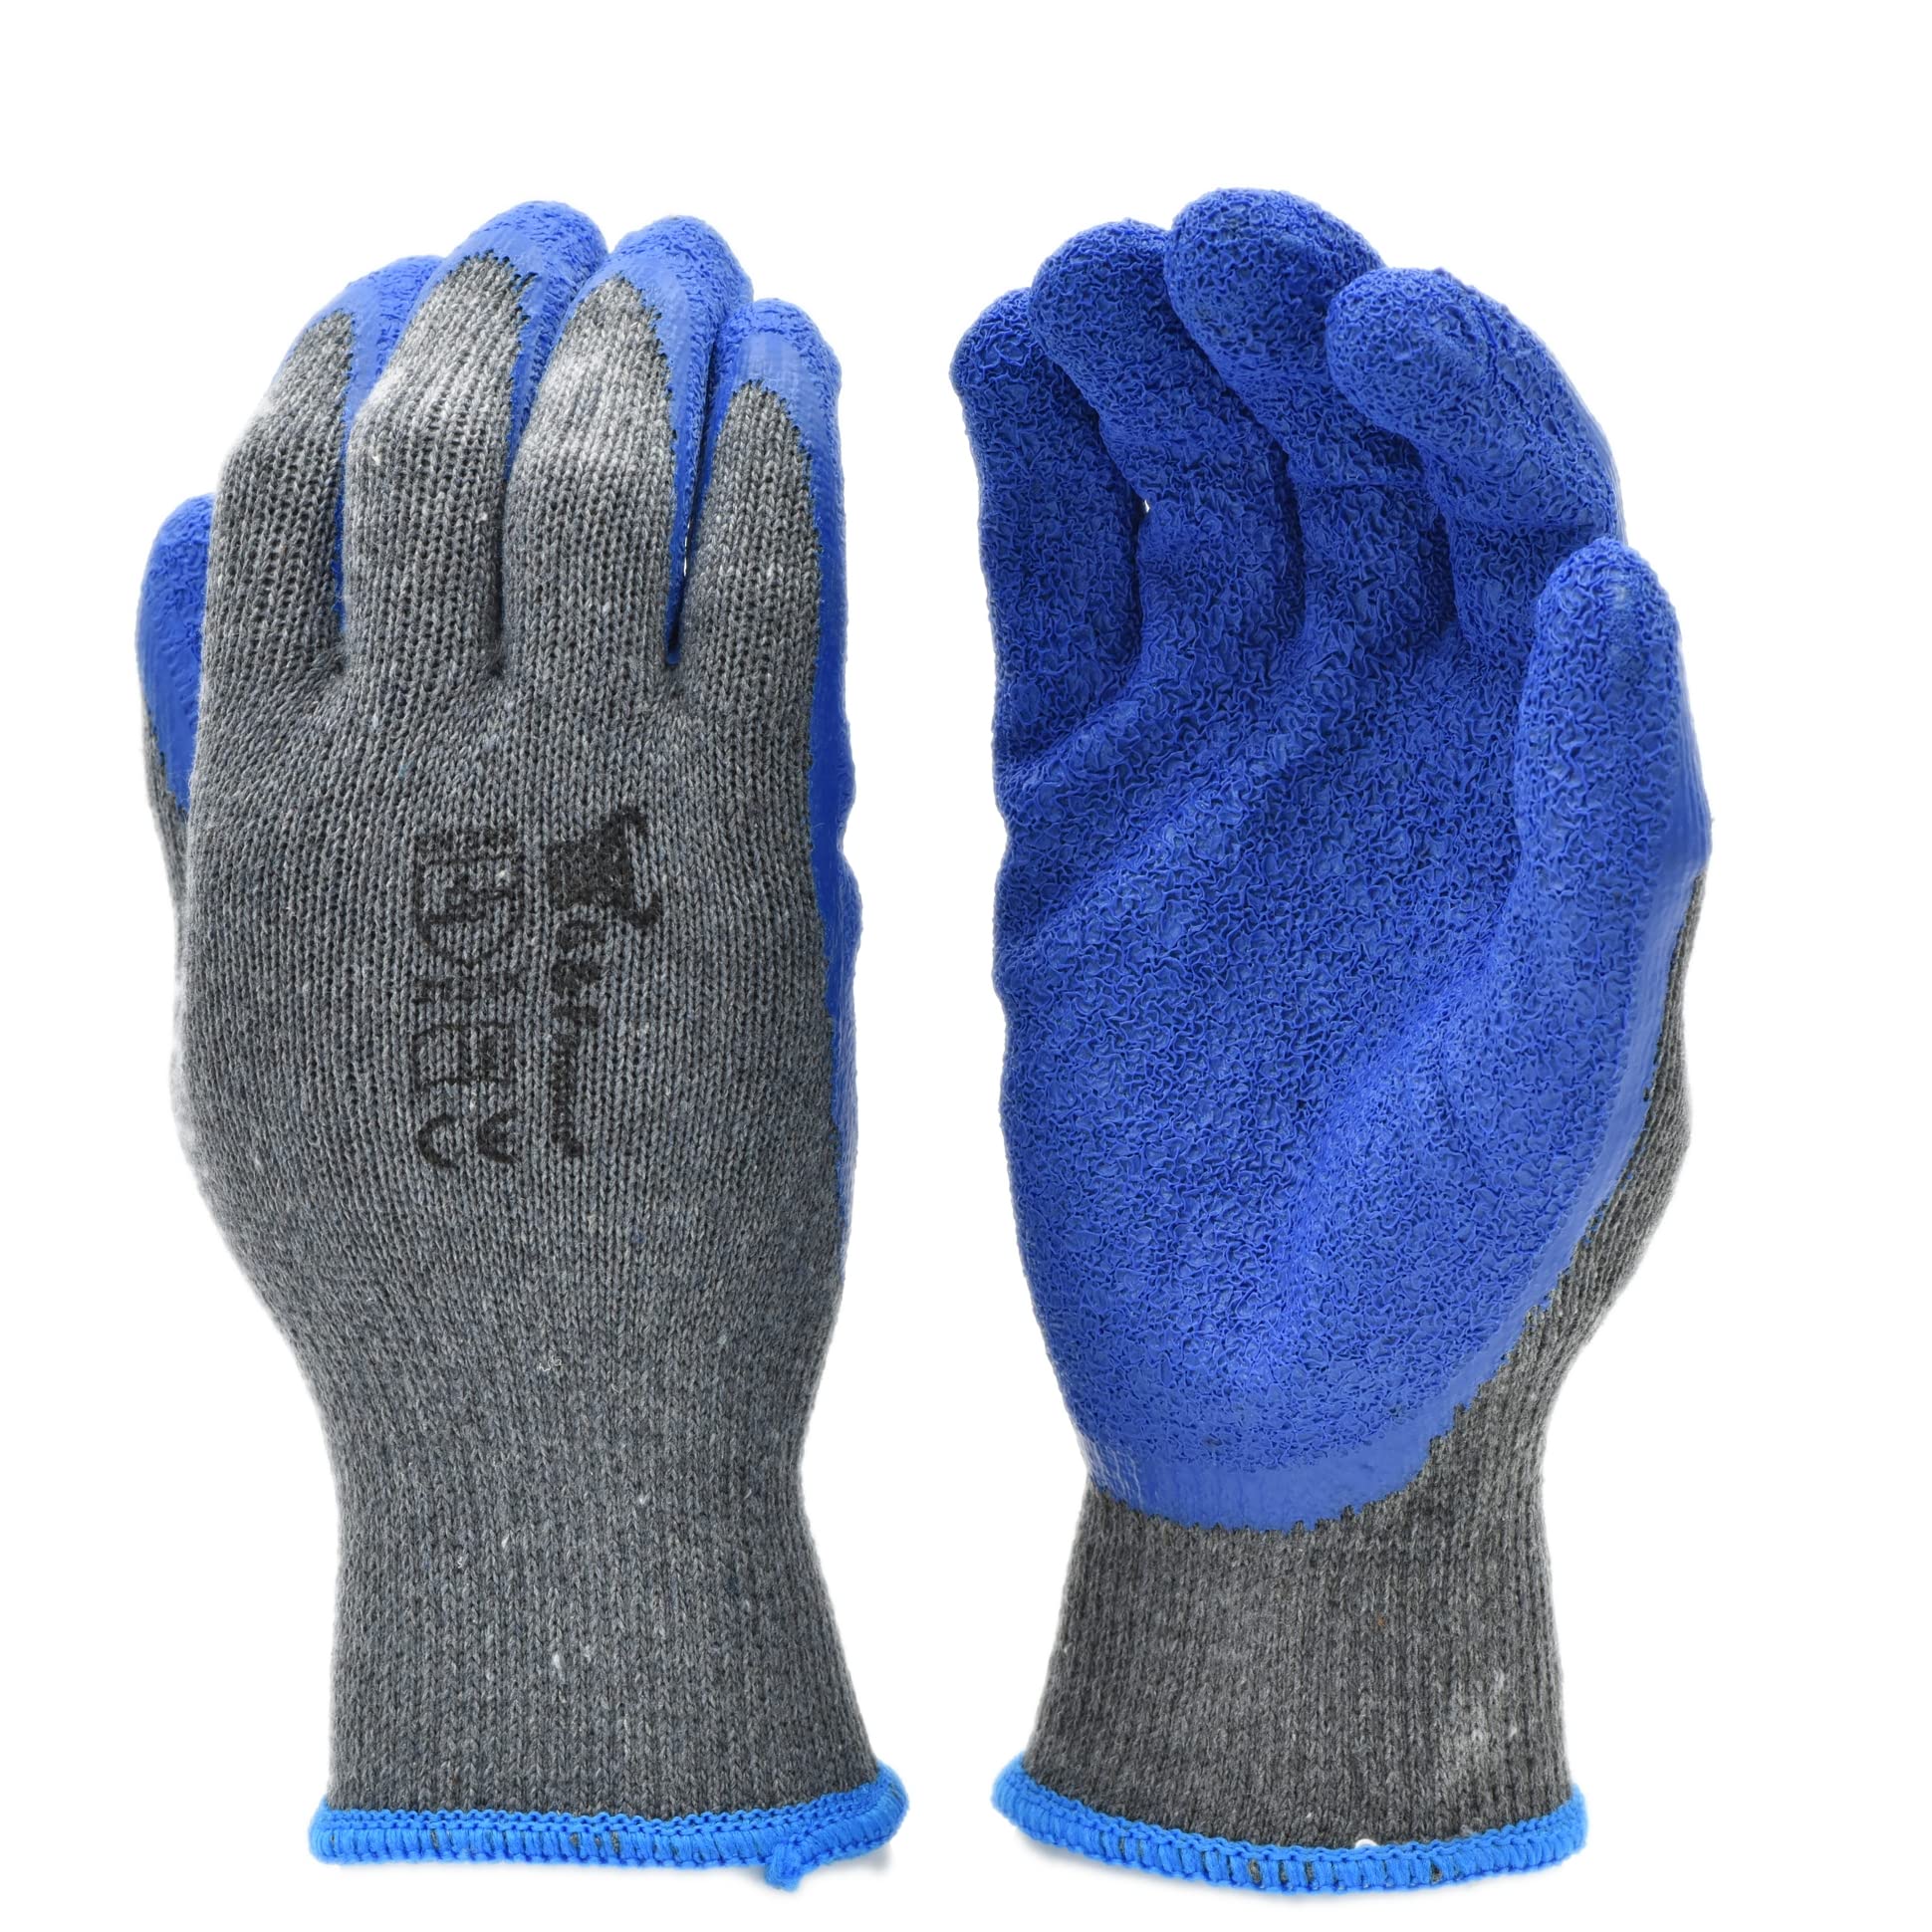 G & F Products - 3100L-DZ-Parent 12 Pairs Large Rubber Latex Double Coated Work Gloves for Construction, gardening gloves, heavy duty Cotton Blend ...